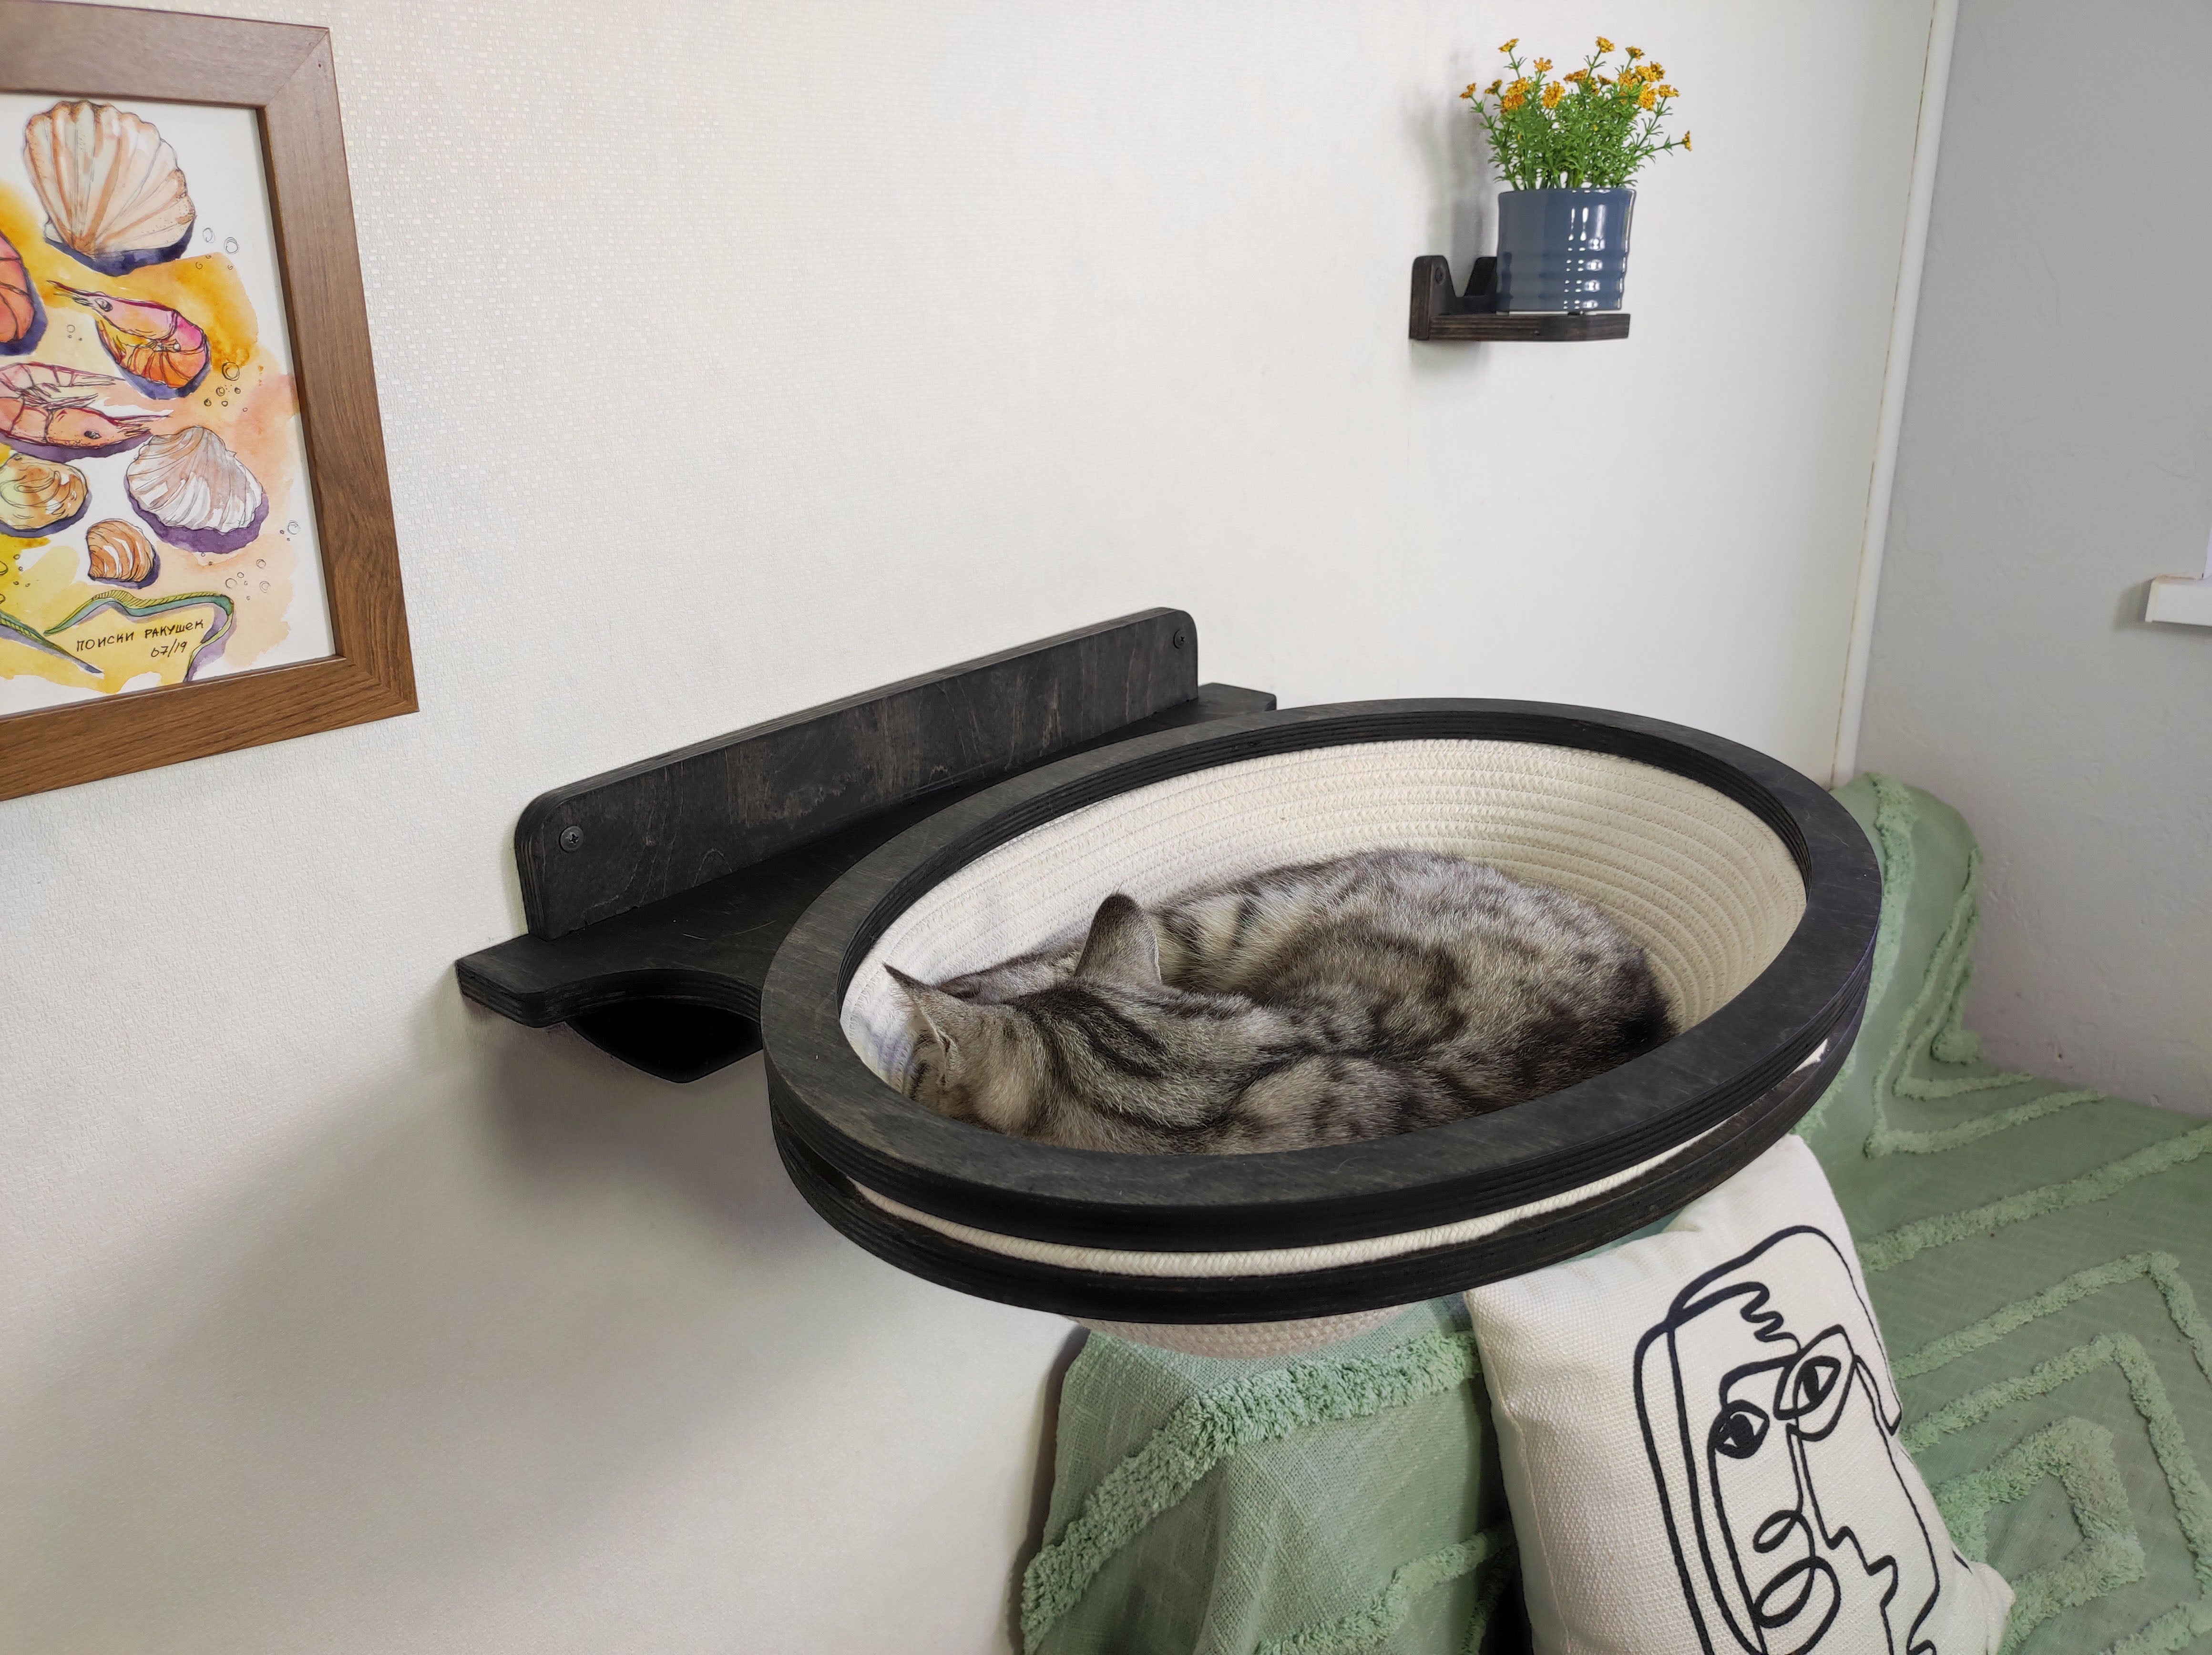 Wall-mounted cat oval shelf with a cat inside